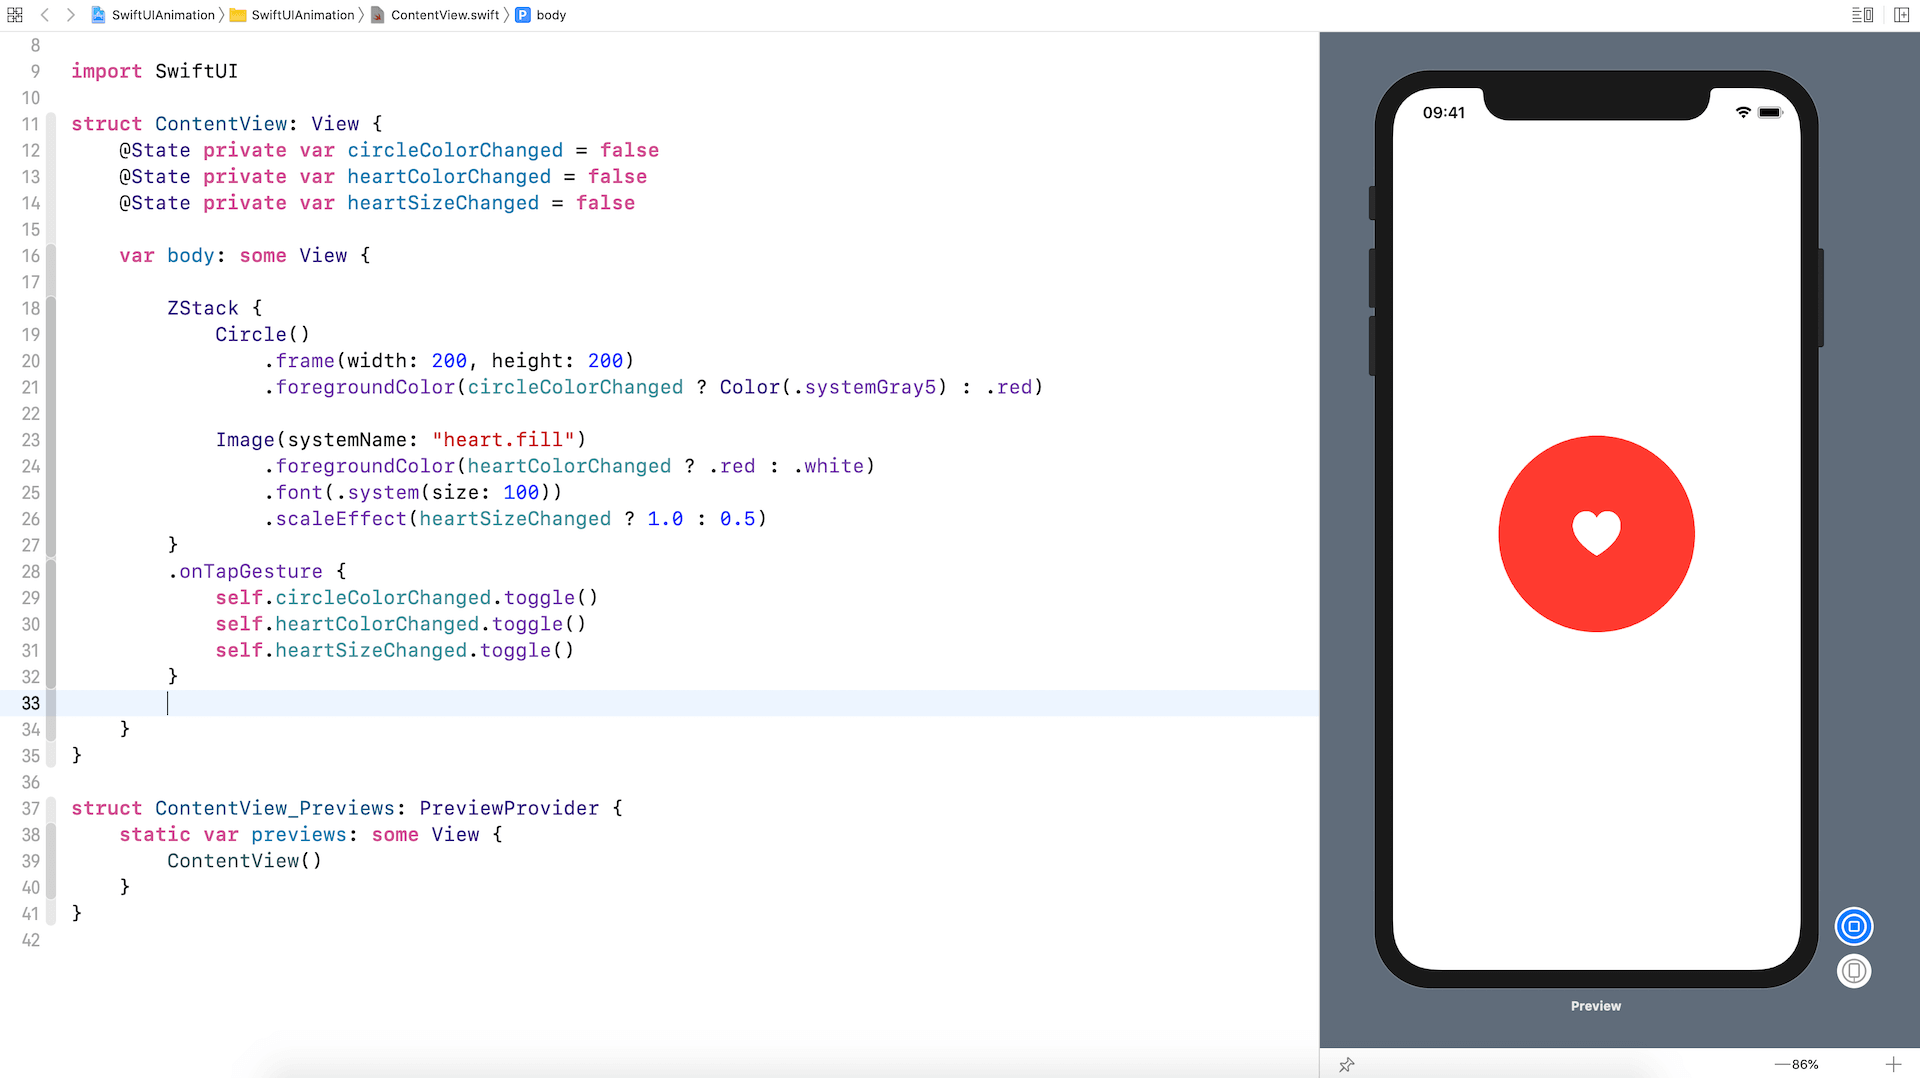 swiftui-animation-project